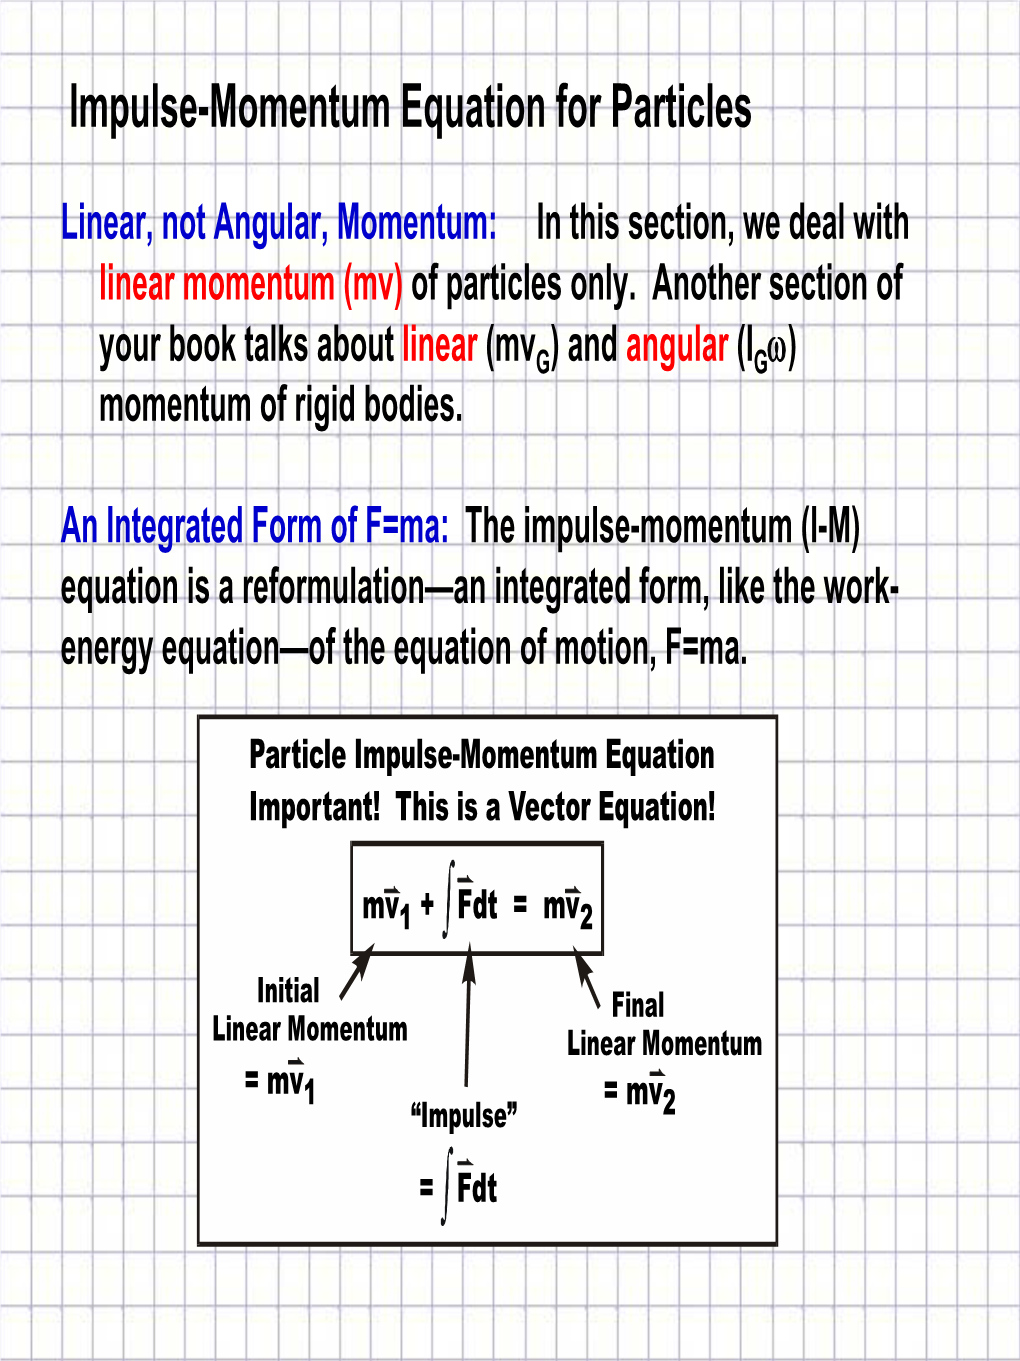 Impulse-Momentum Equation for Particles